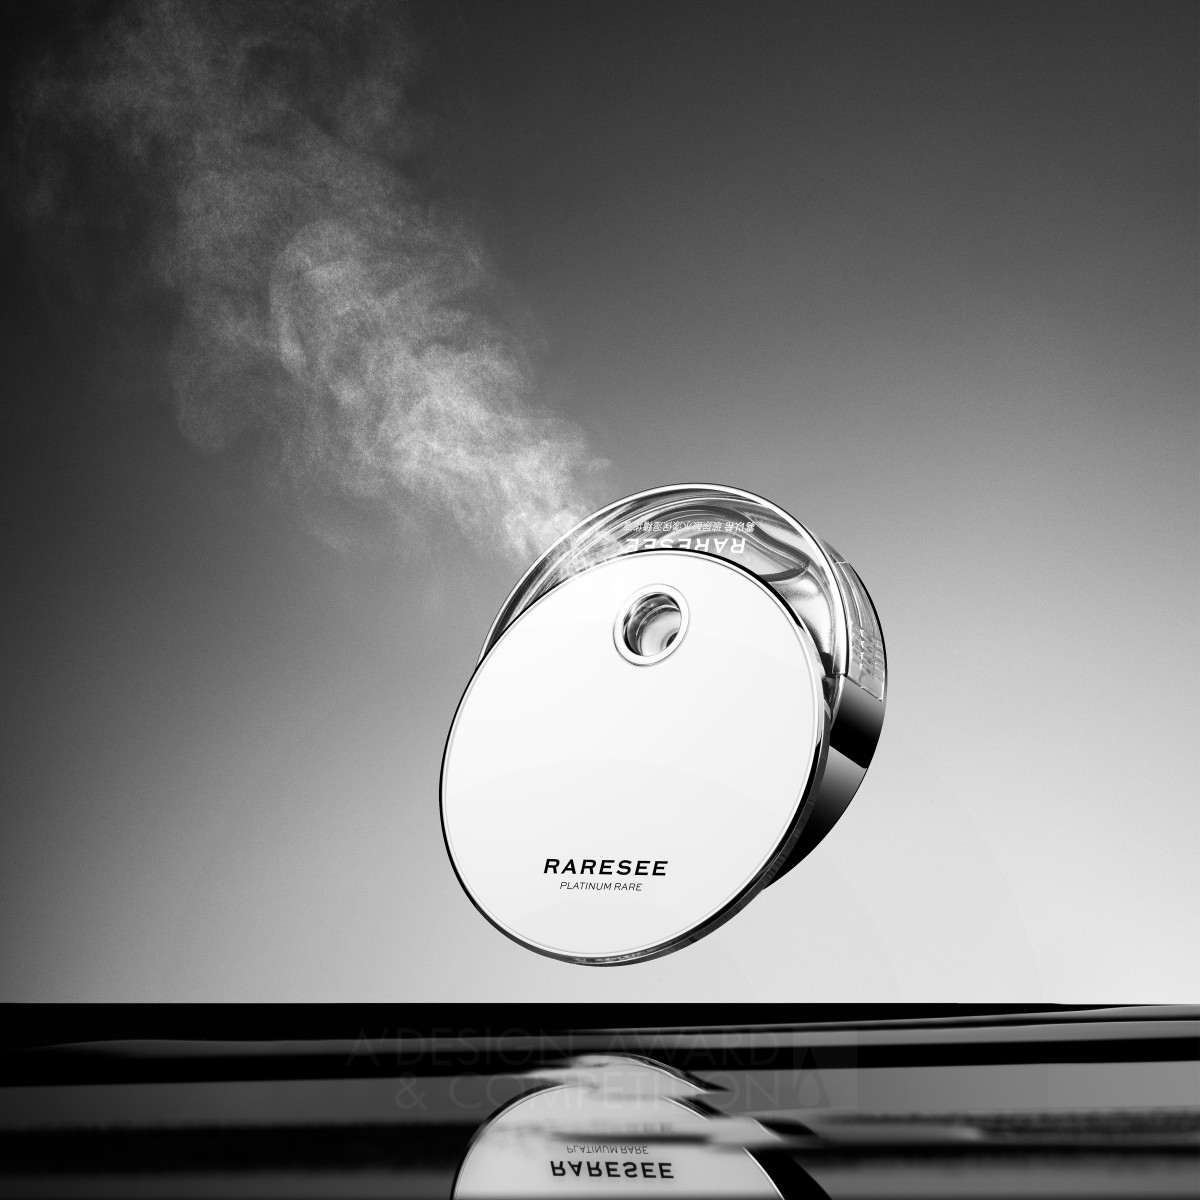 The Eclipse Raresee Atomized Beauty Equipment by HAOXIANG HU